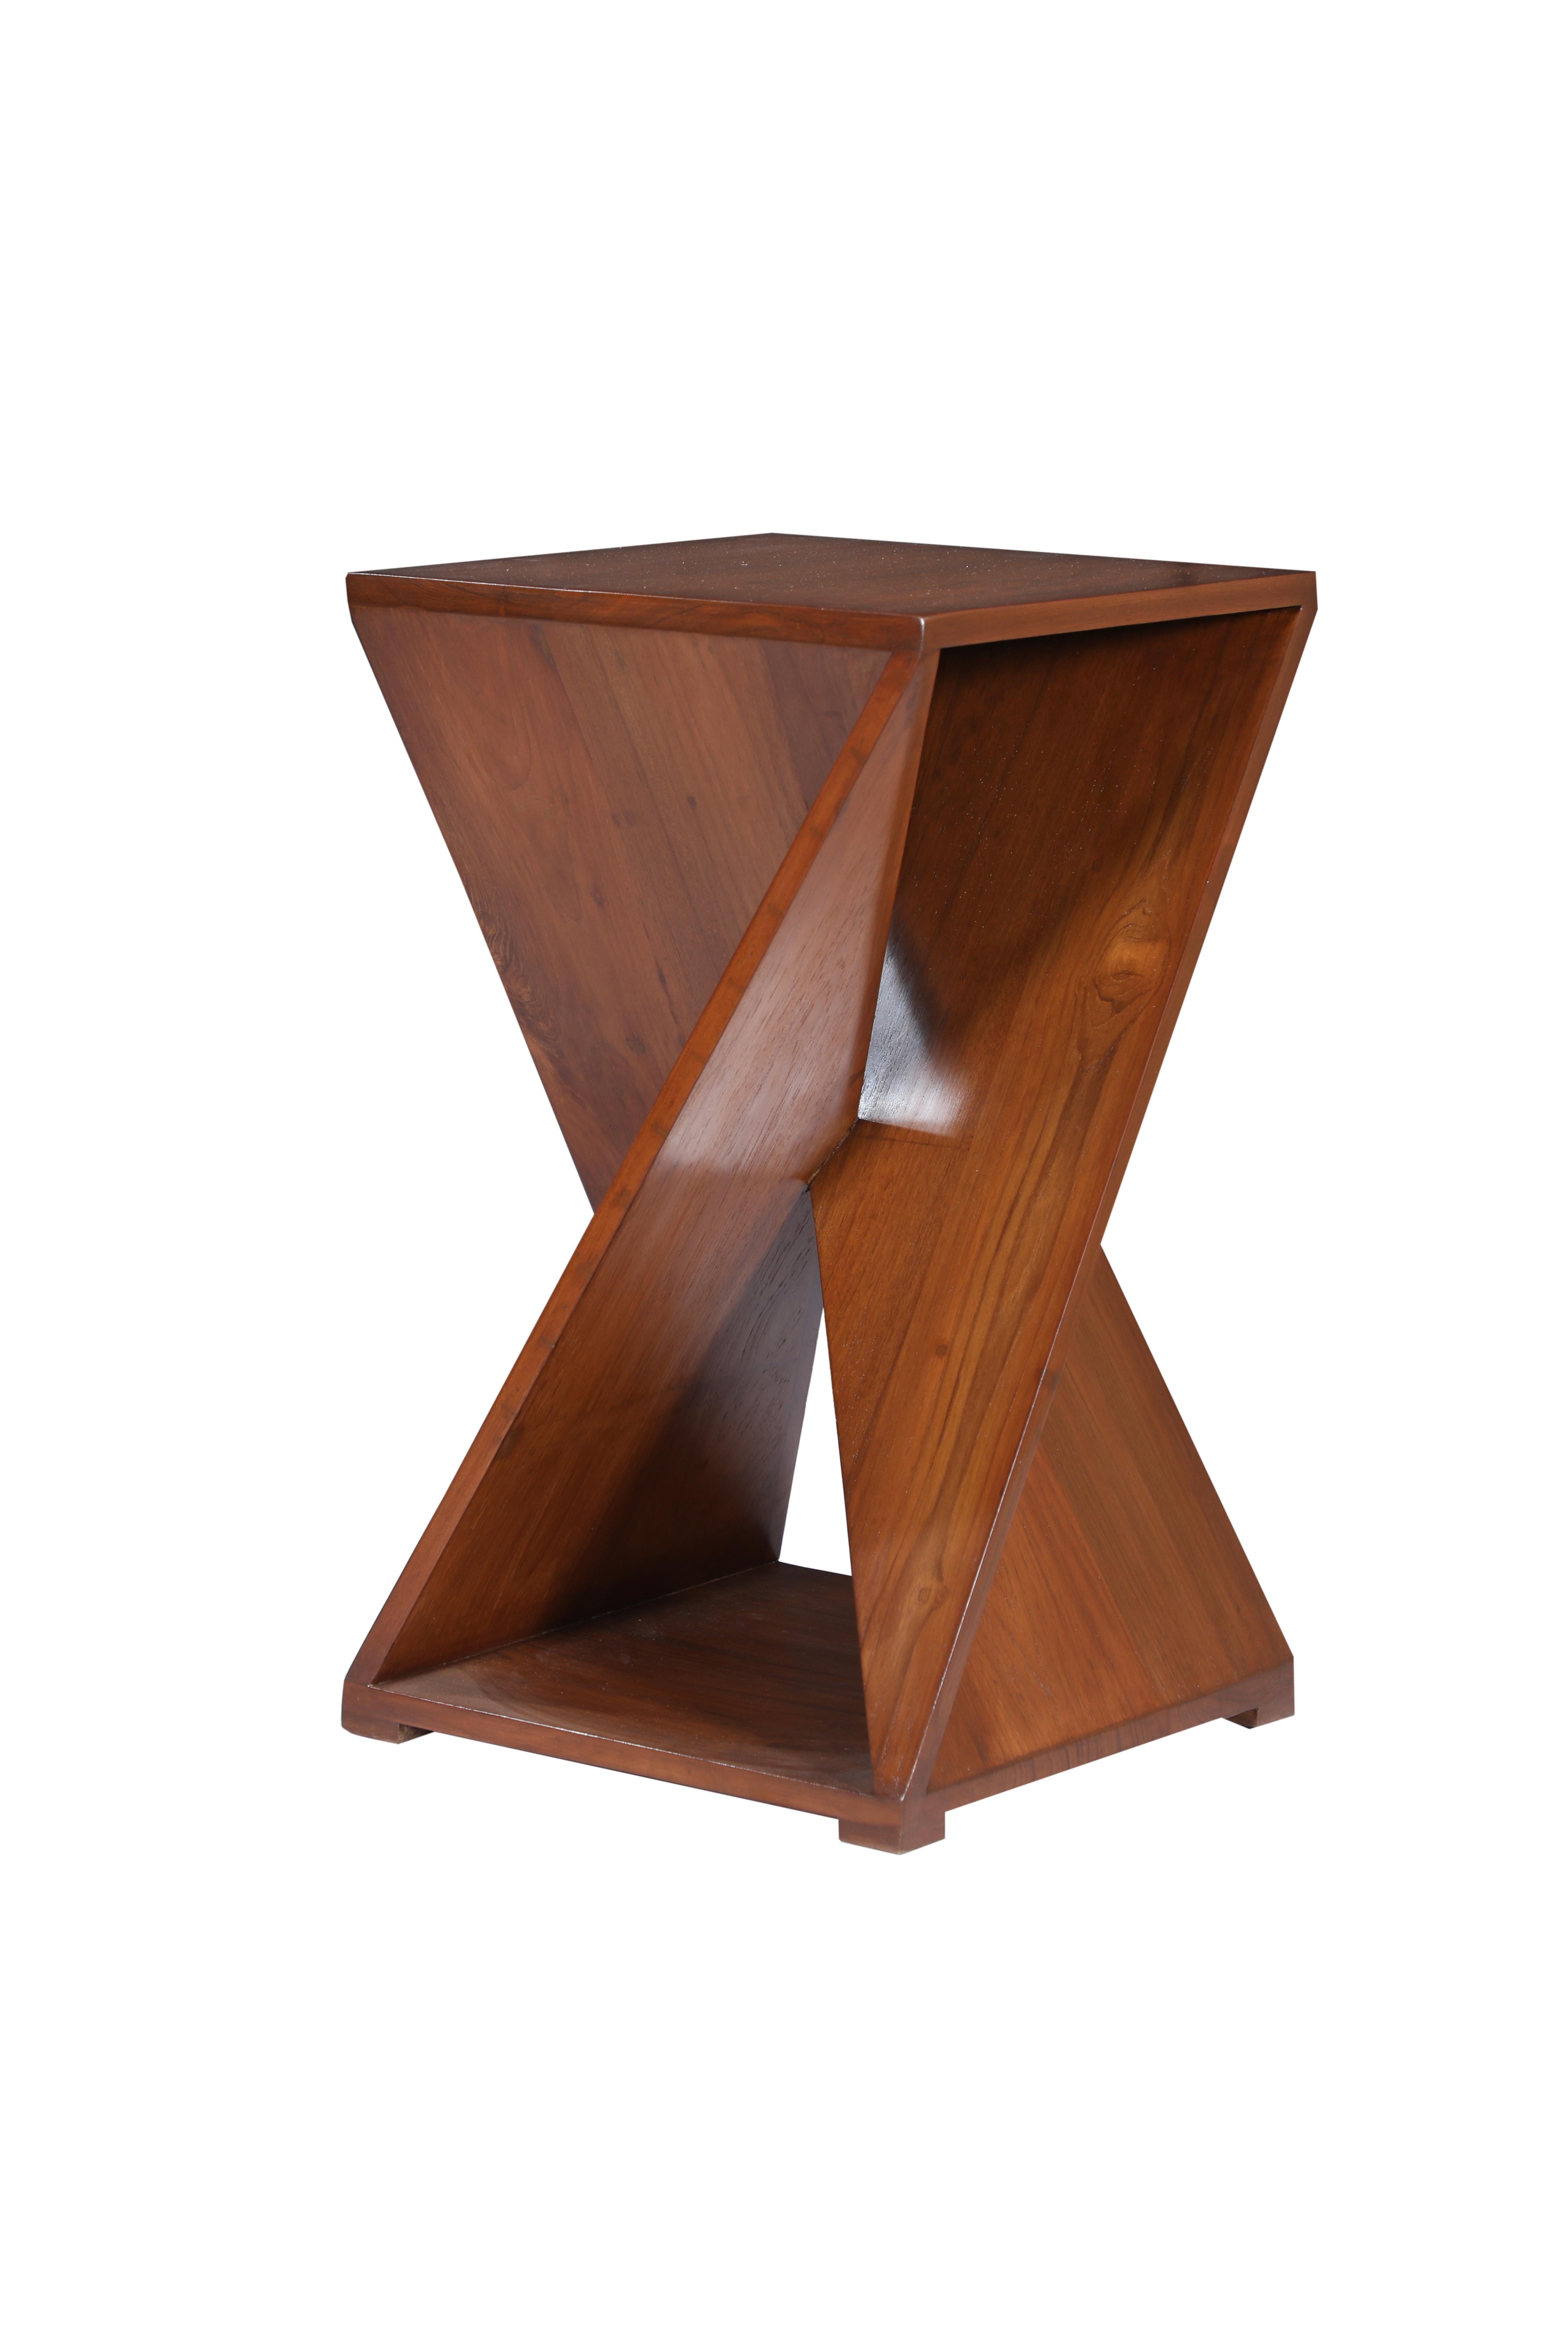 Contemporary Pair of Teak Architectural Side or End Tables by Deborah Lockhart Phillips